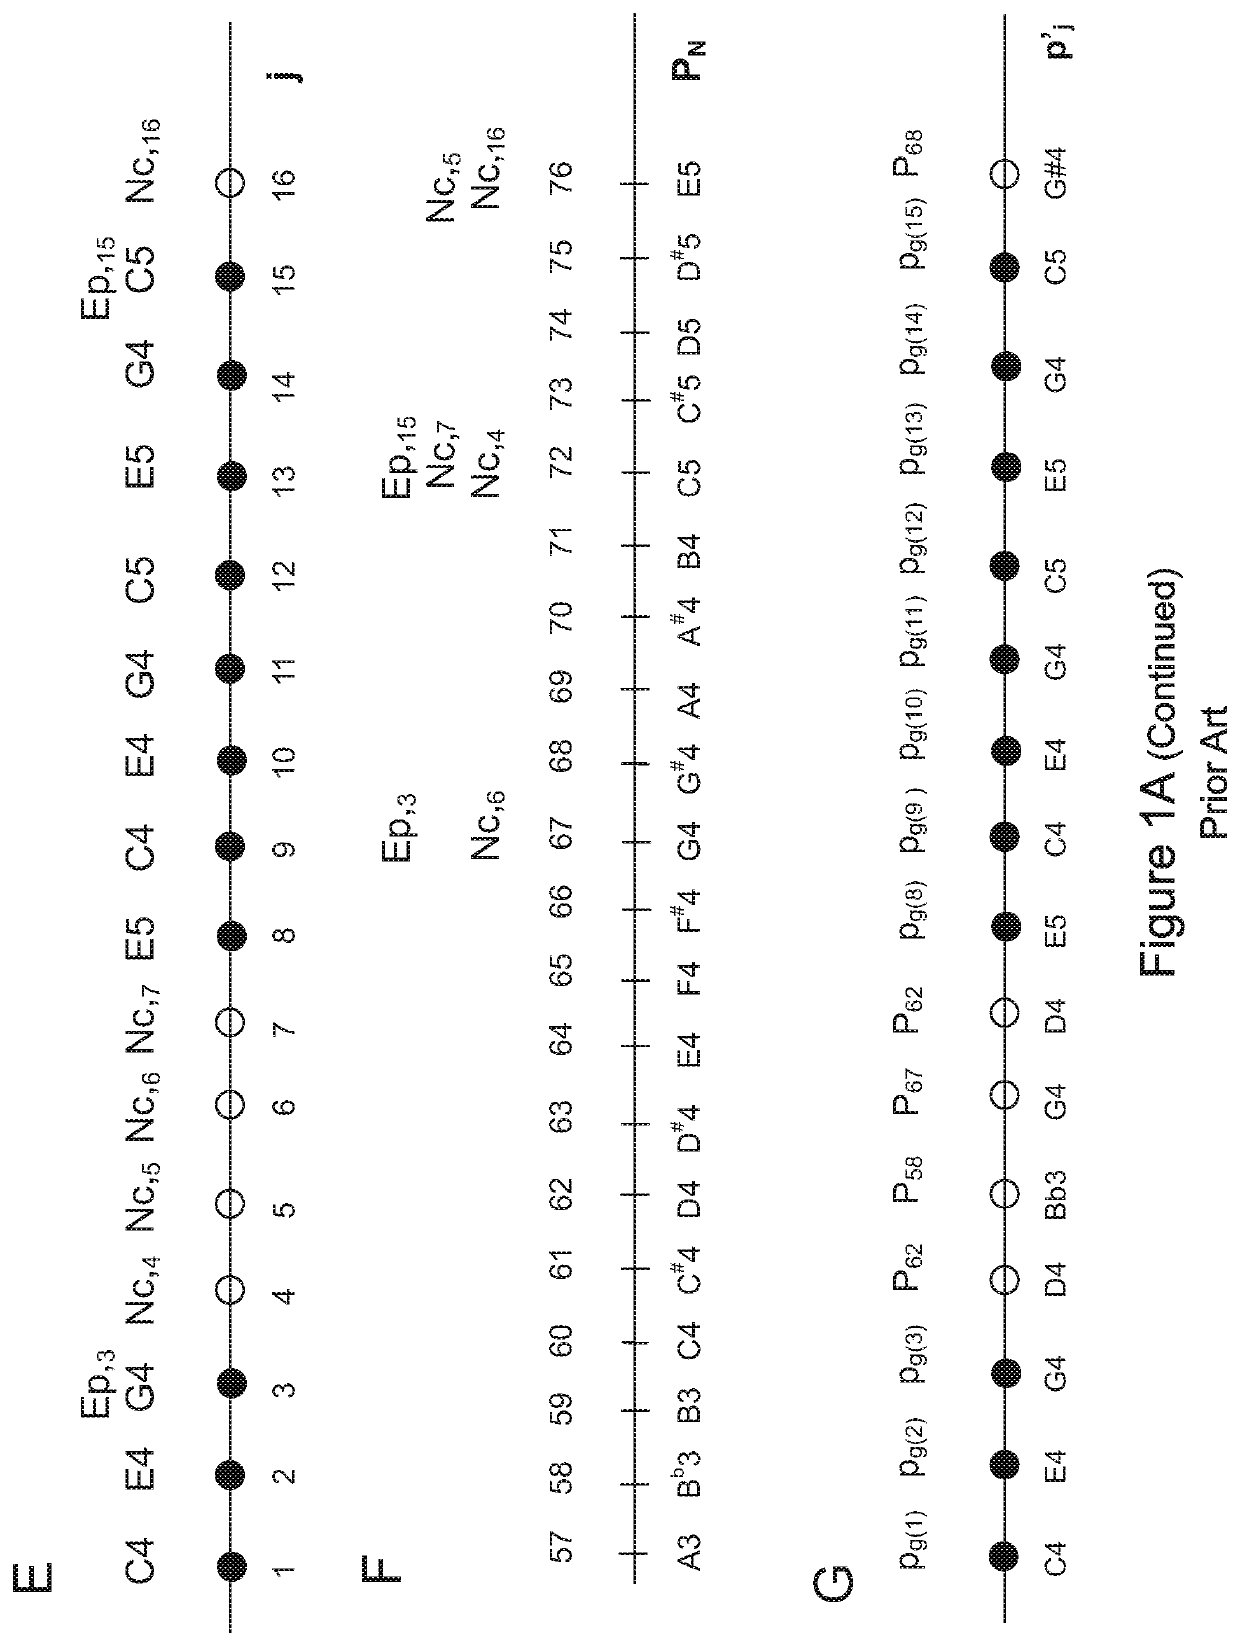 Method of creating musical compositions and other symbolic sequences by artificial intelligence